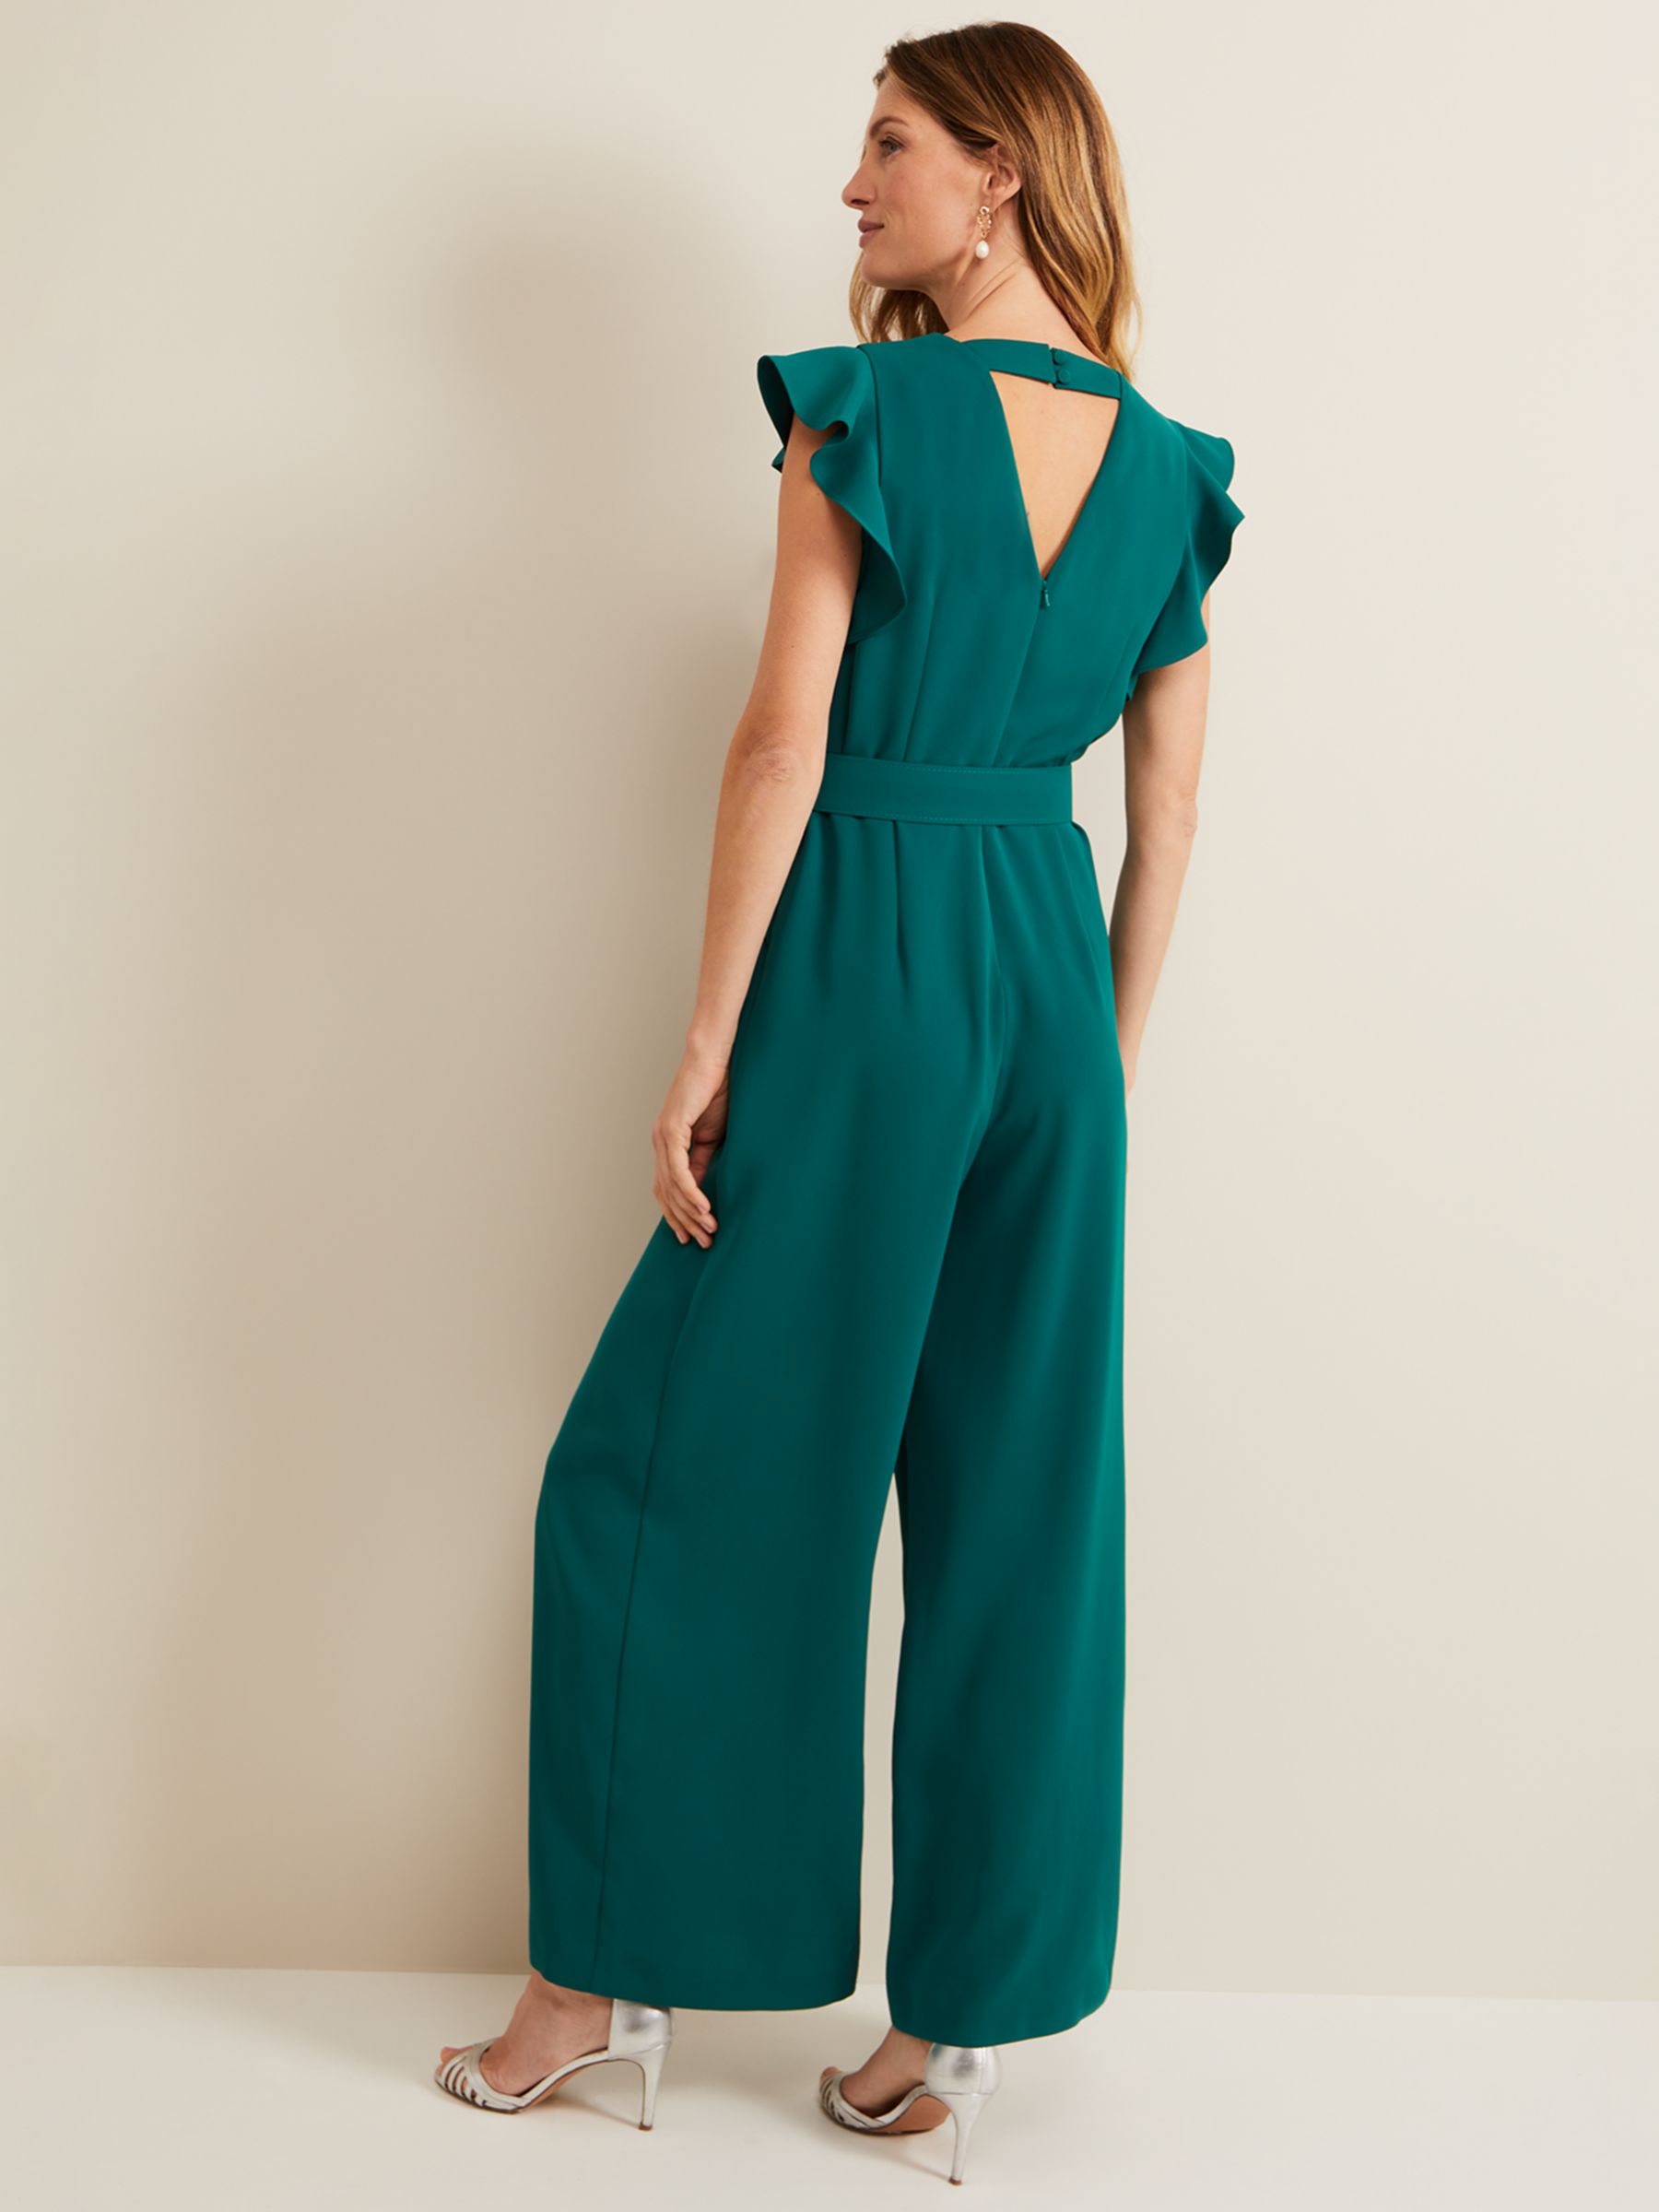 Phase Eight Kallie Belted Jumpsuit, Green, 16